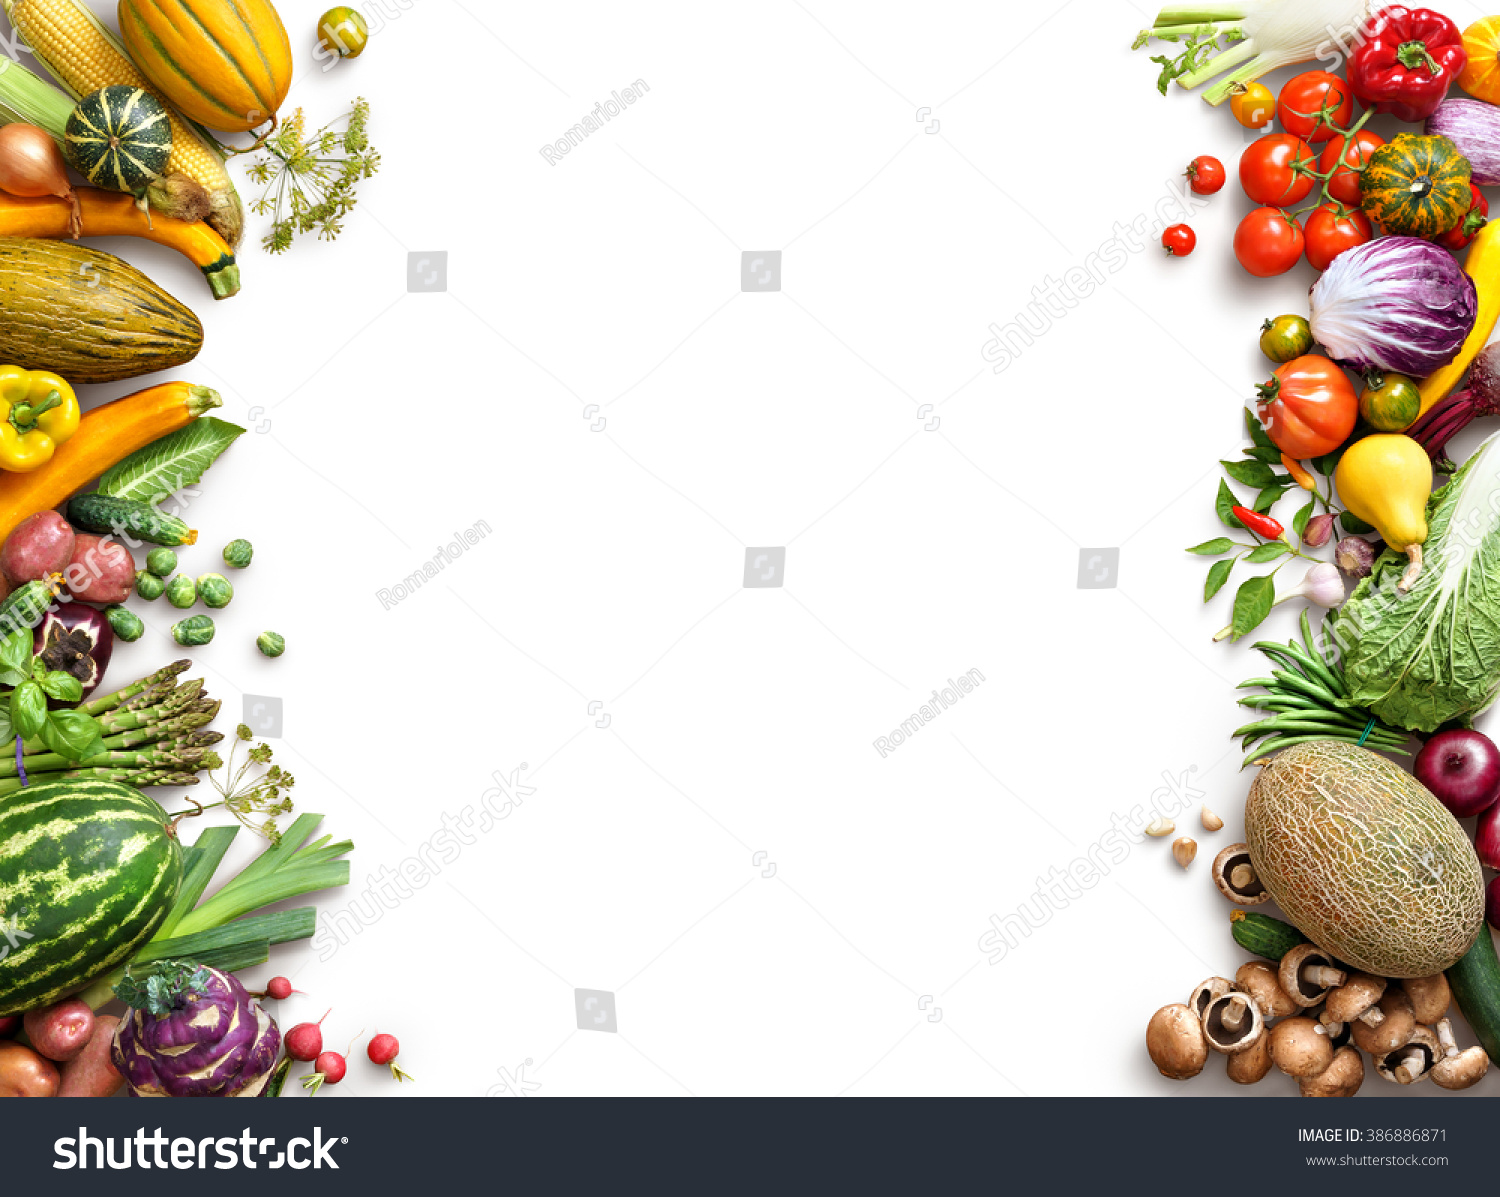 Healthy eating background. Food photography different fruits and vegetables isolated white background. Copy space. High resolution product #386886871